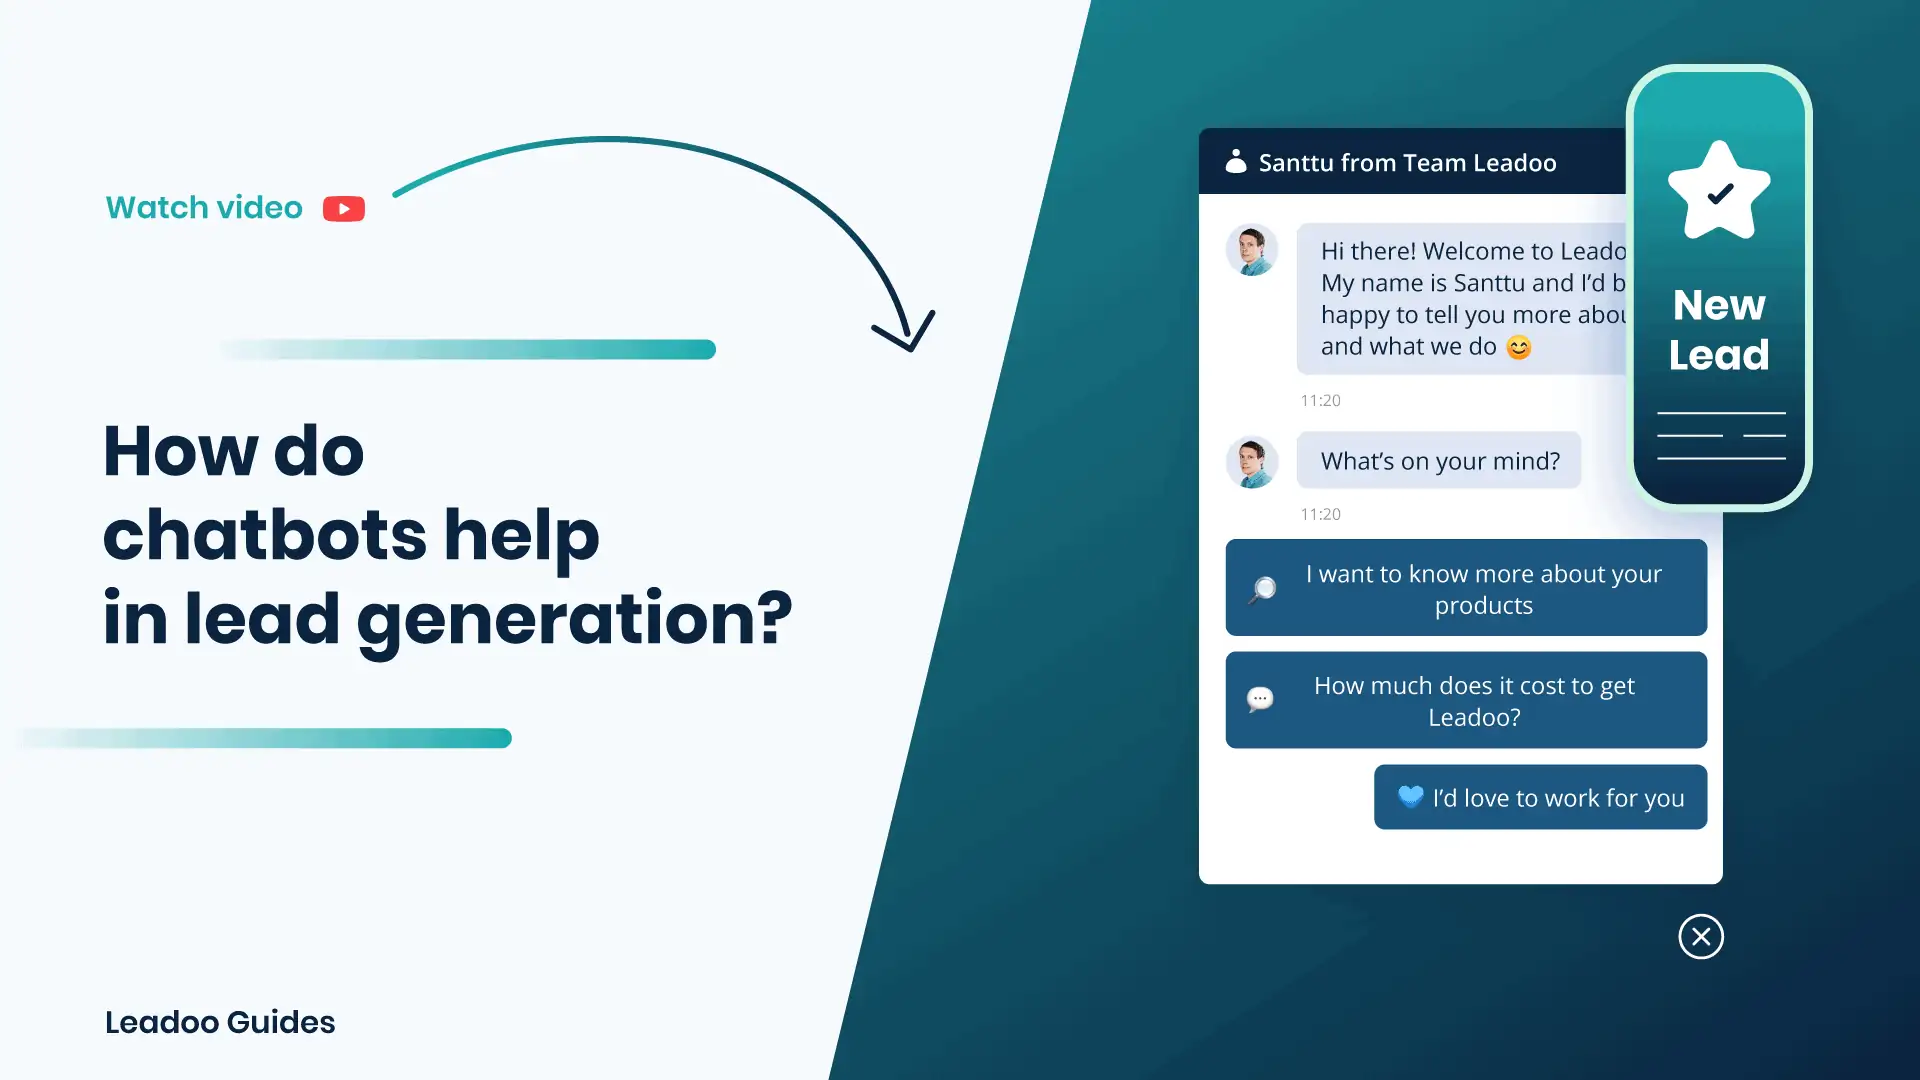 How do chatbots help in lead generation how chatbots help in lead generation How do chatbots help in lead generation?